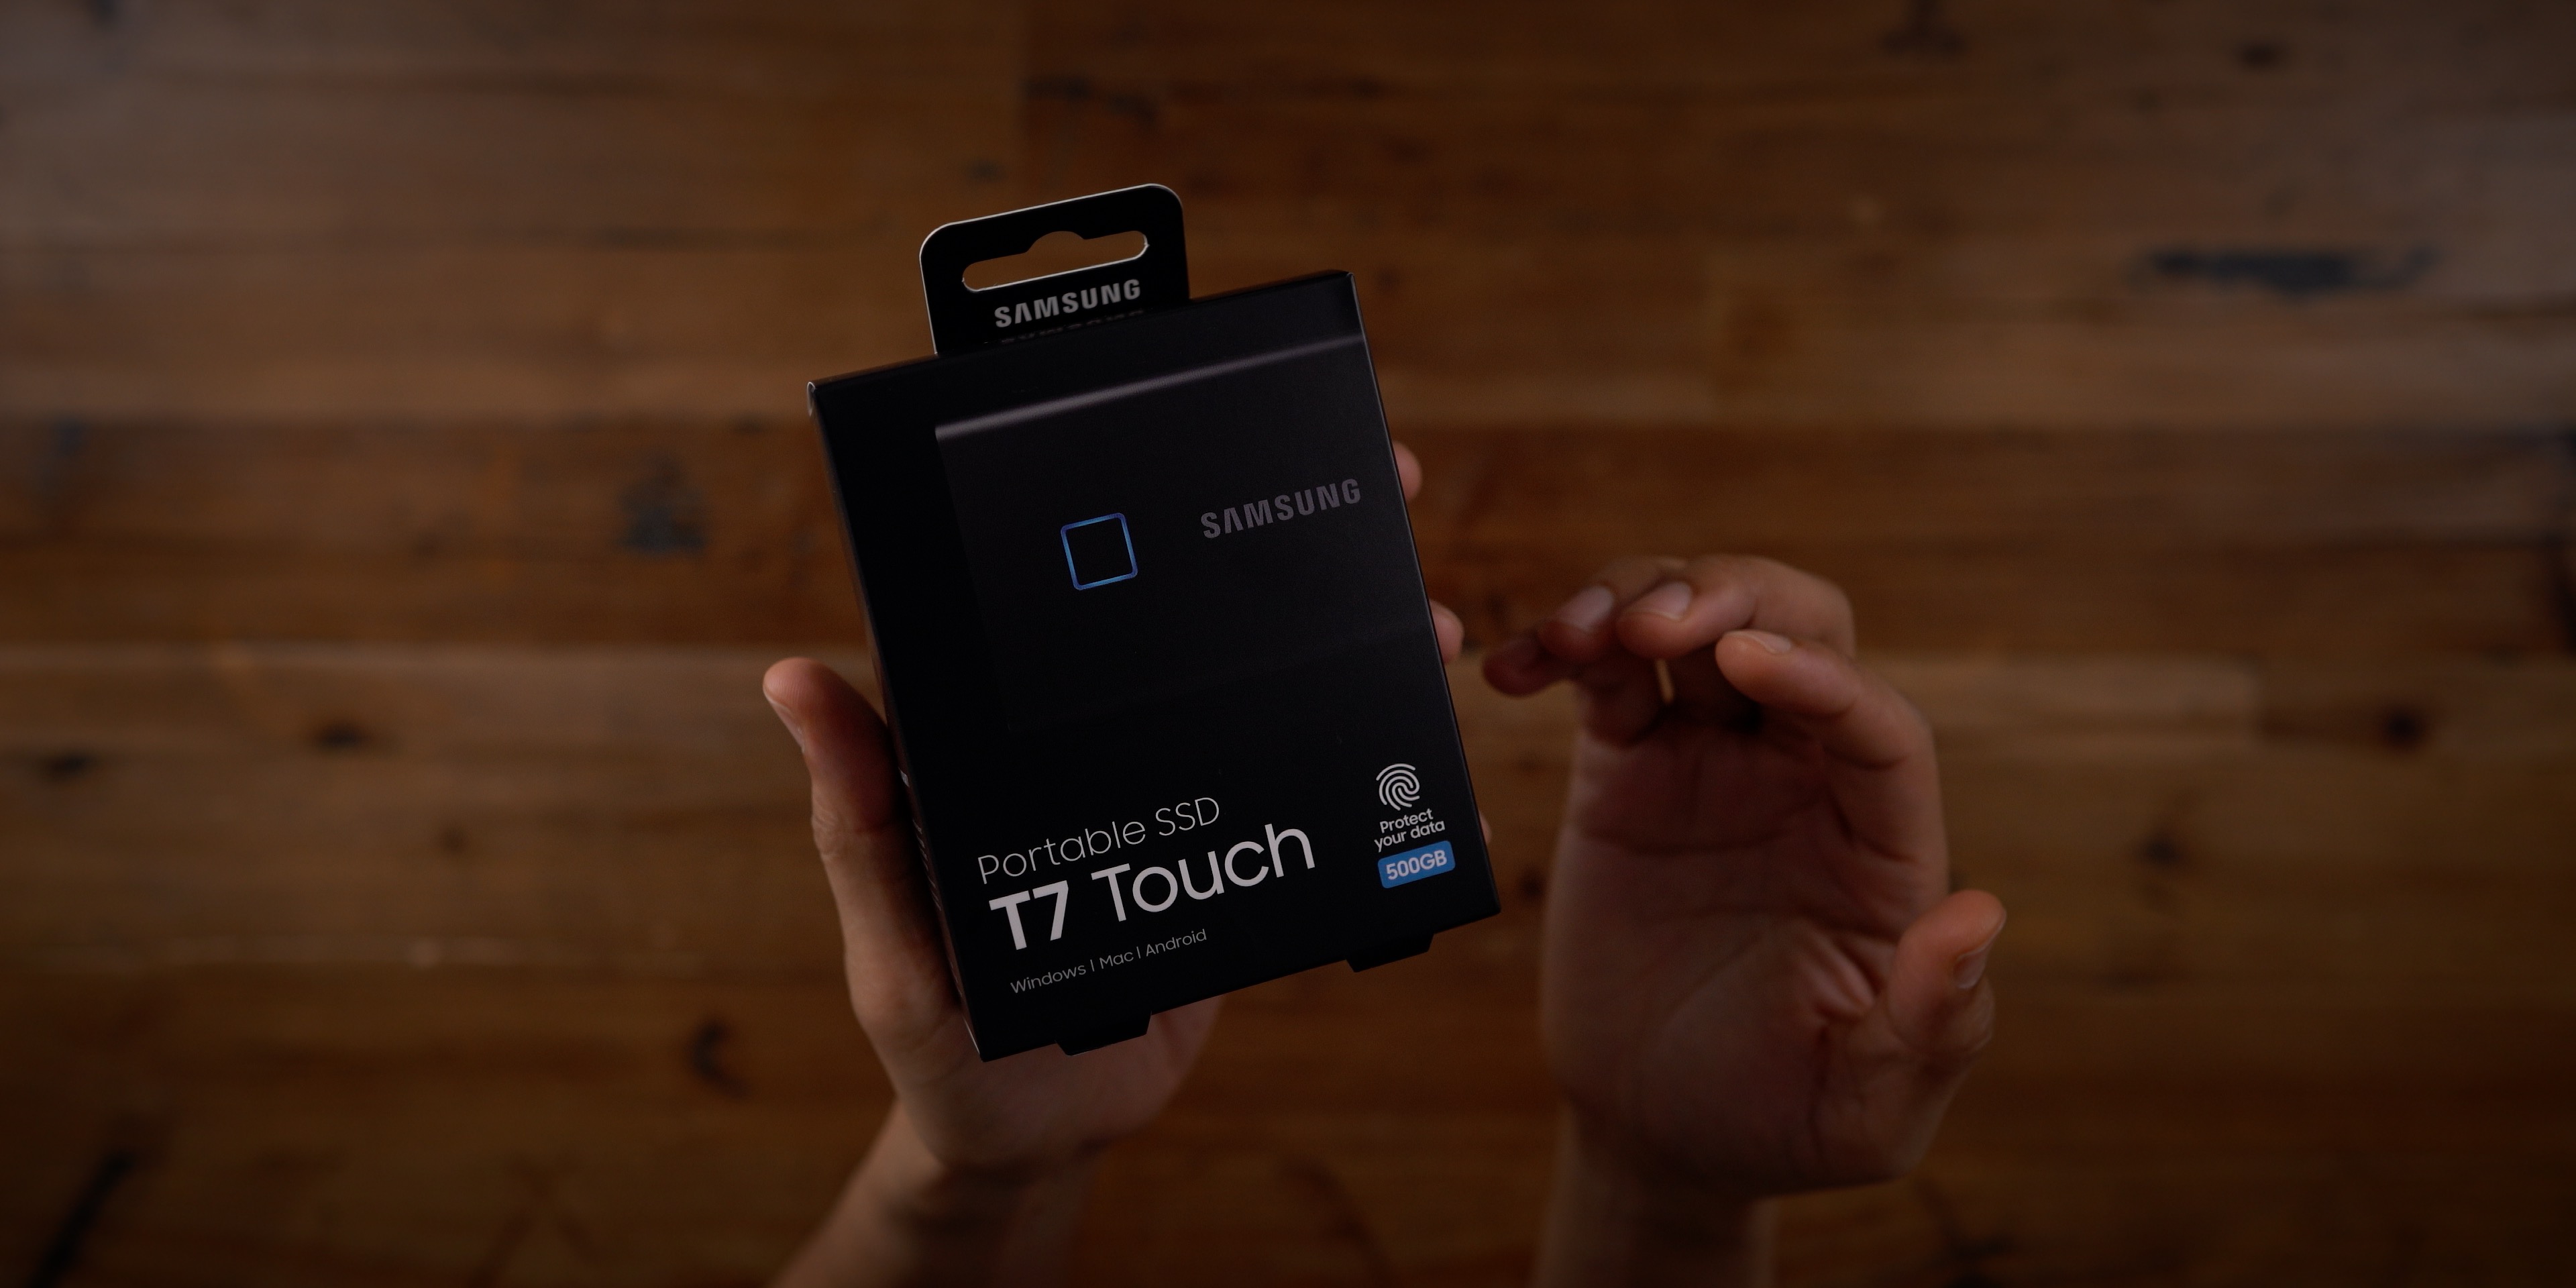 Samsung T7 Touch review